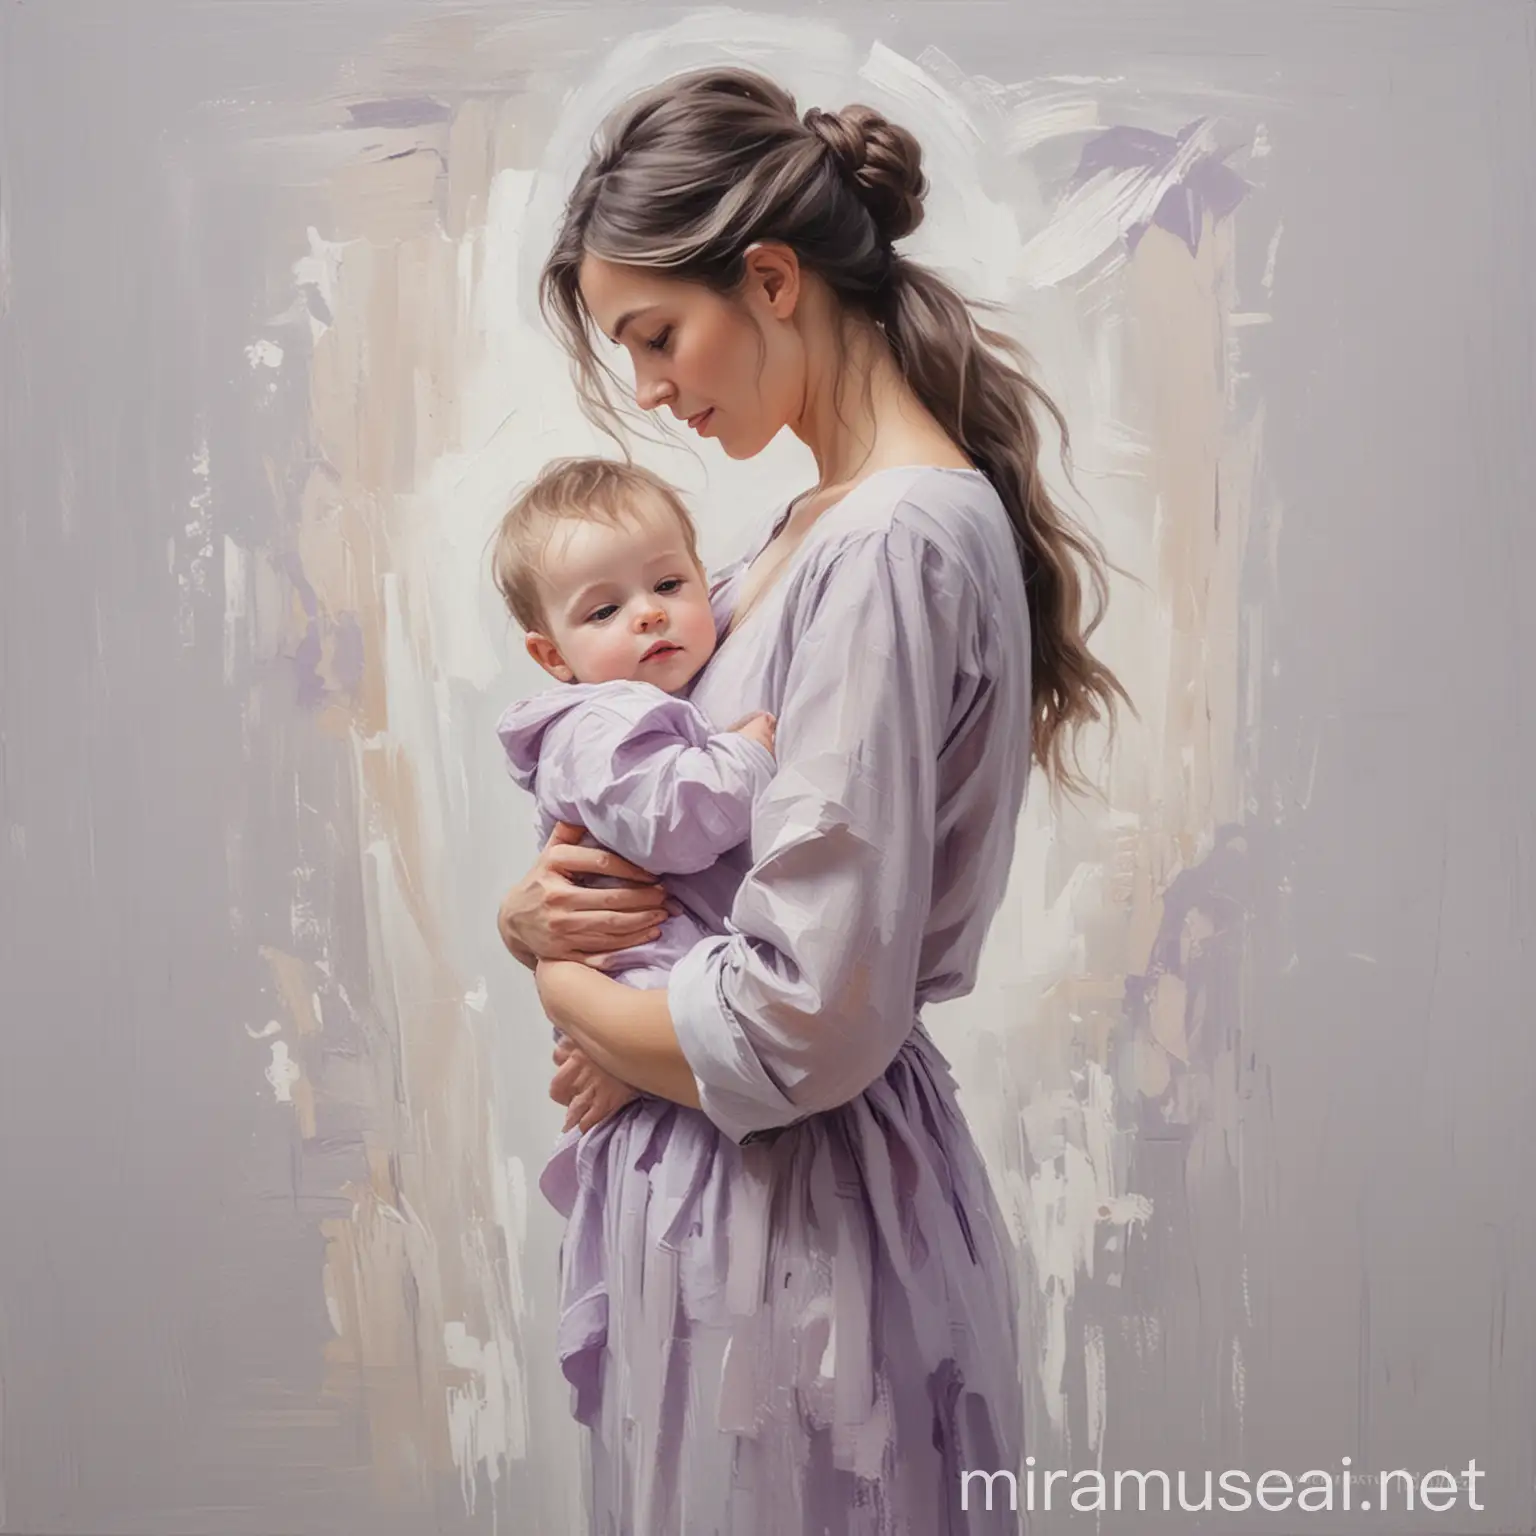 An oil painting of a mother holding her child, back,
abstract, impressionist, painted in a soft style to create an ethereal, dreamy atmosphere. The painting is in the style of an oil painting by an impressionist artist with soft tones. The background is white and light gray with a slight purple tint. The image conveys calm and serenity. This is an impressionist oil painting with clearly visible brushstrokes